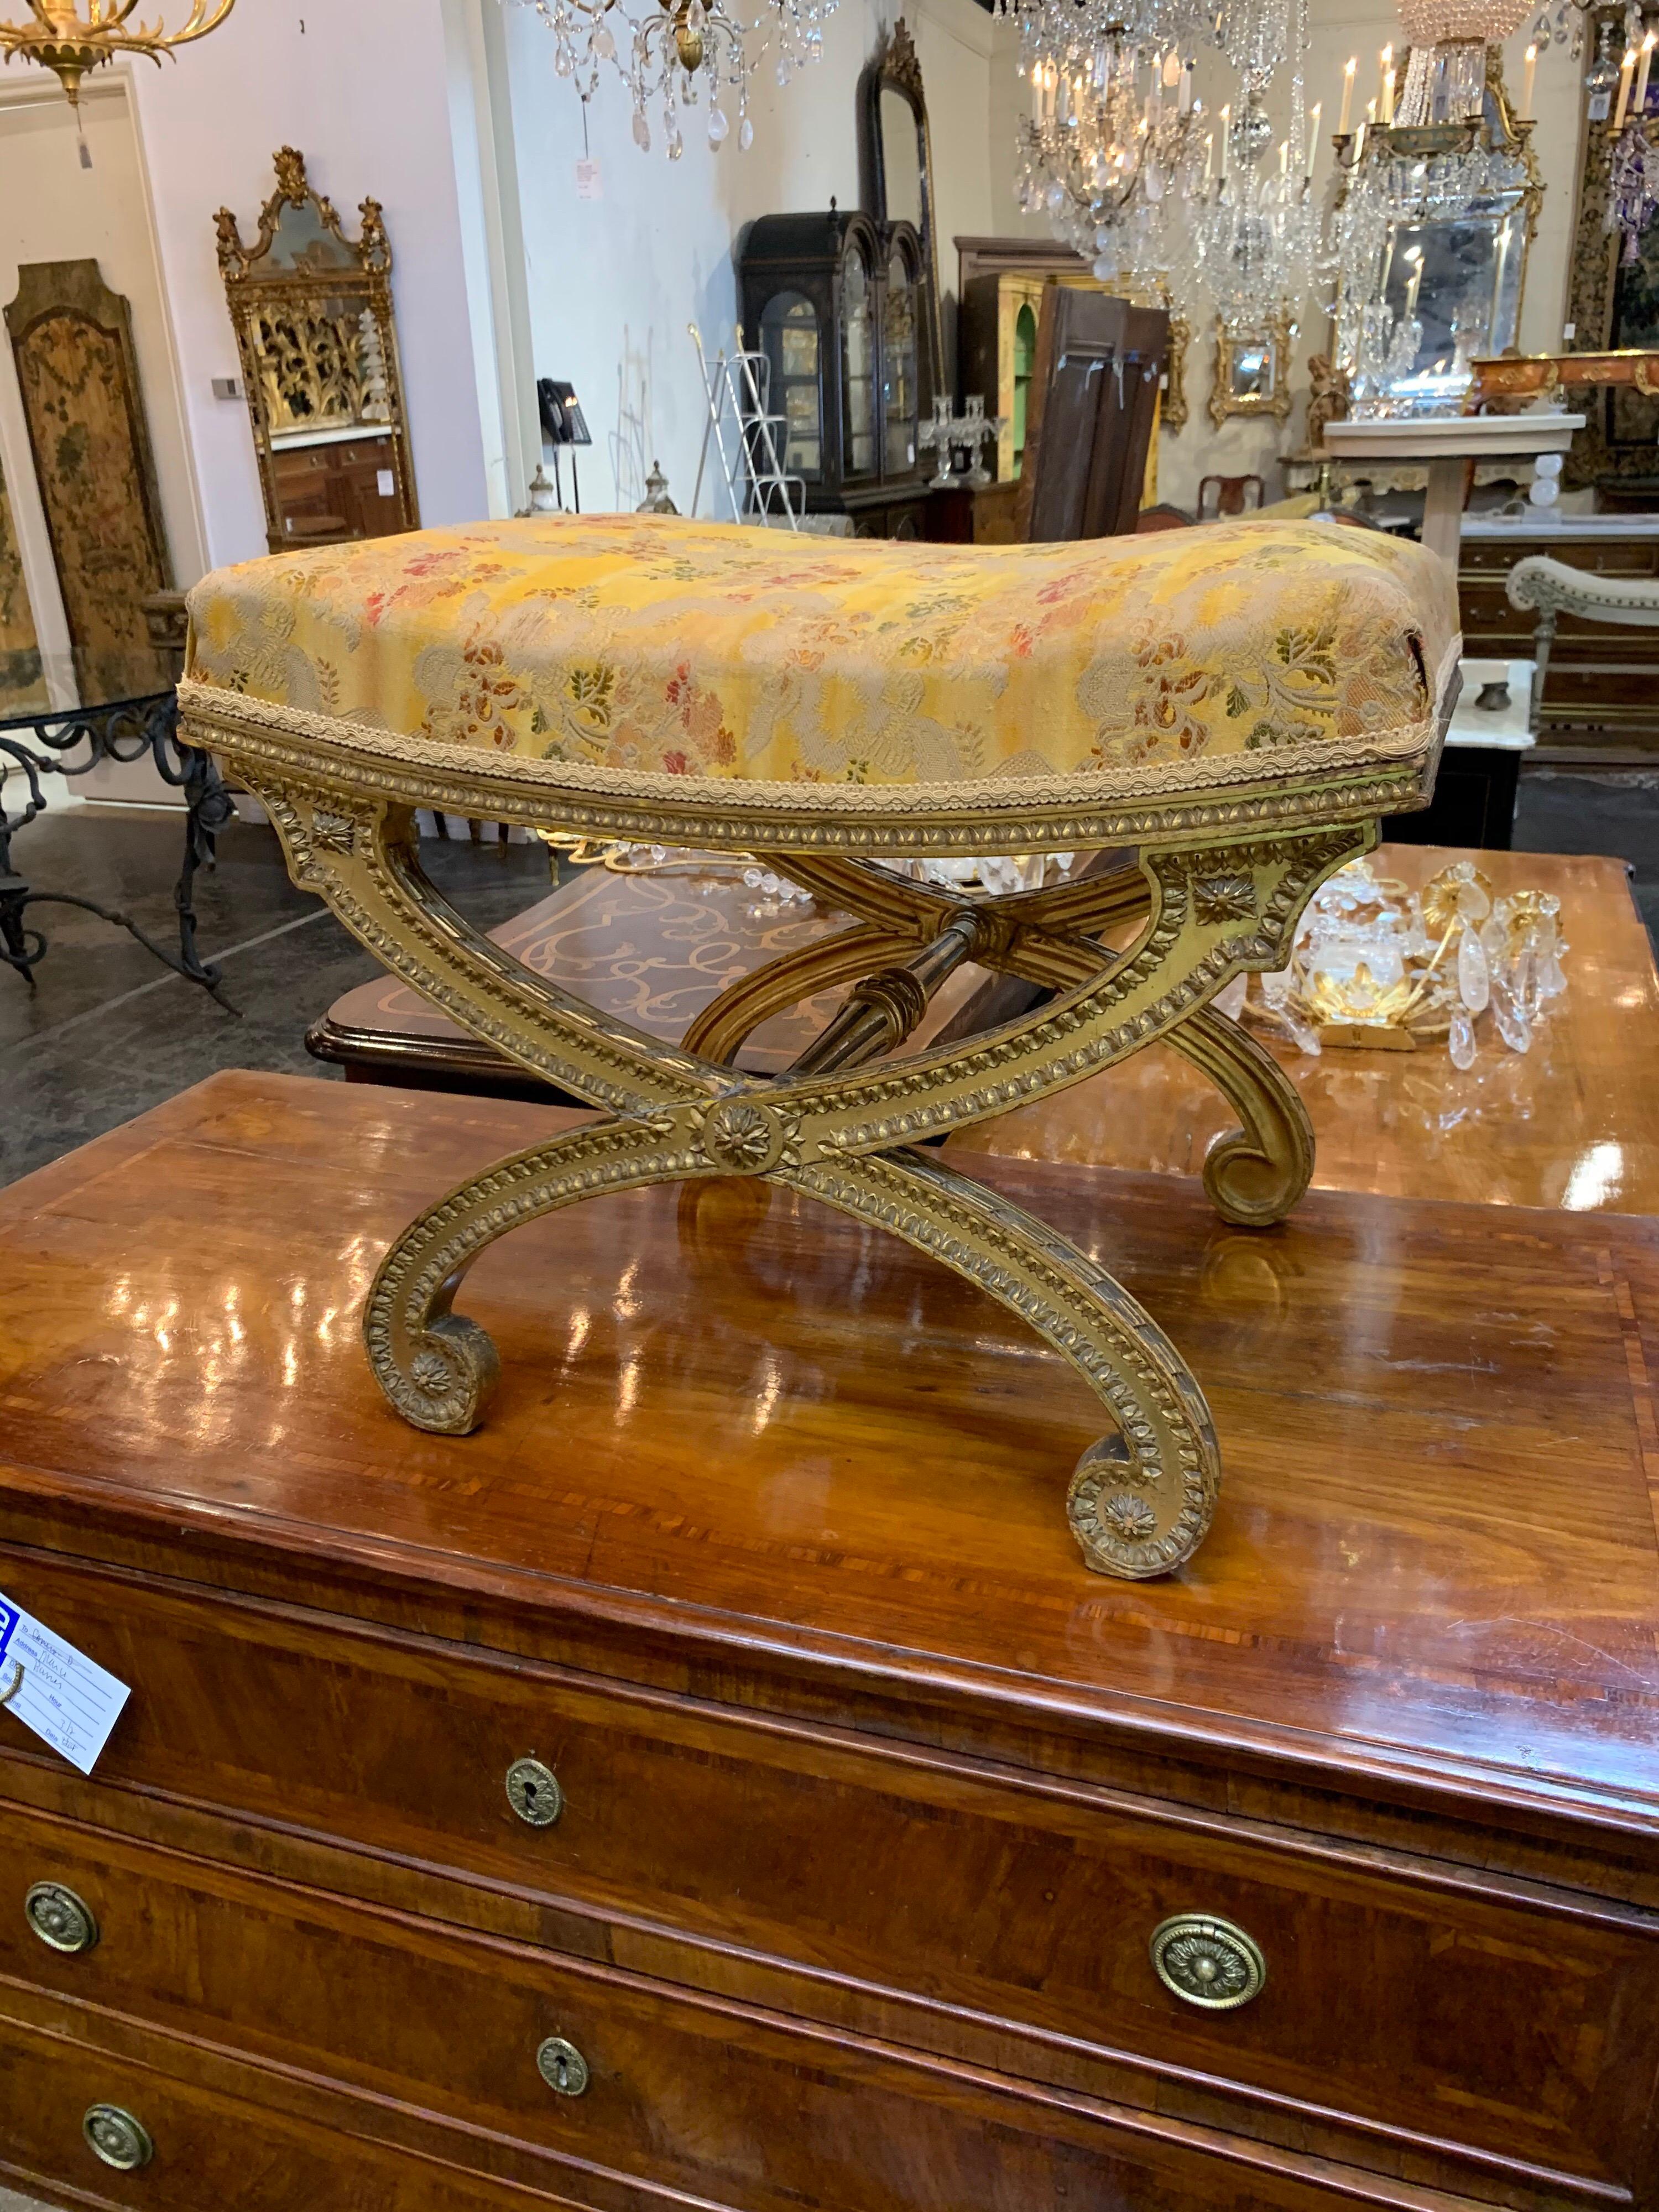 Very decorative 19th century French Louis XVI style carved and giltwood stool. Exceptional carving on this piece along and upholstered in a lovely yellow silk floral fabric. A Classic beauty!